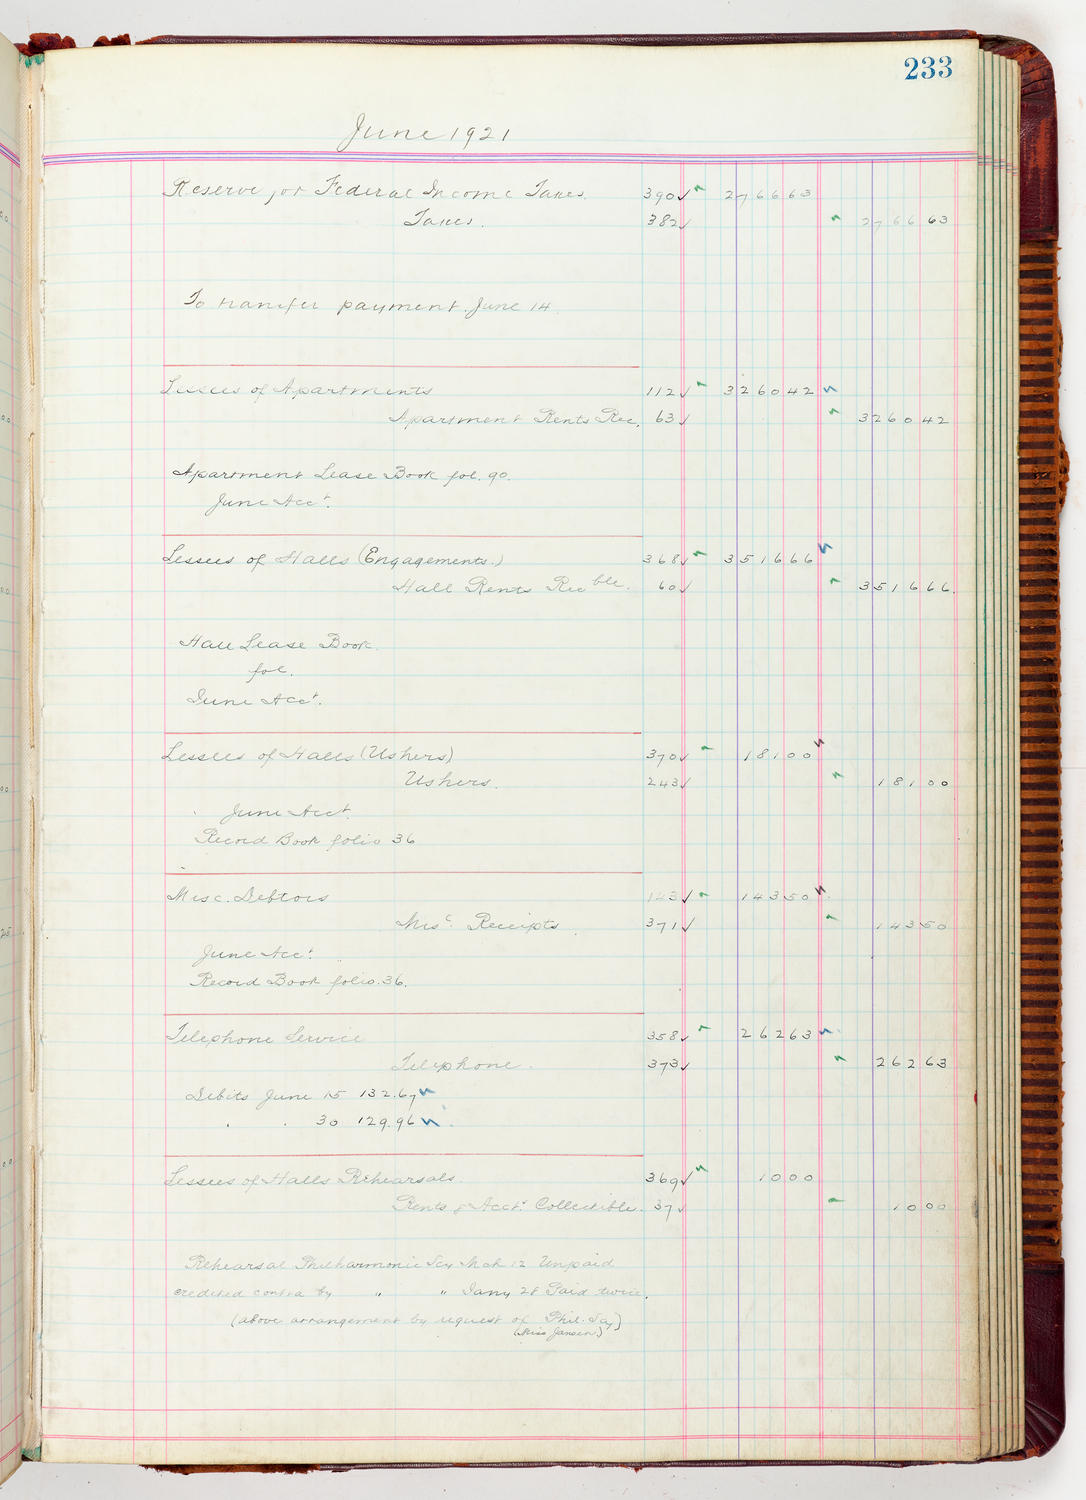 Music Hall Accounting Ledger, volume 5, page 233